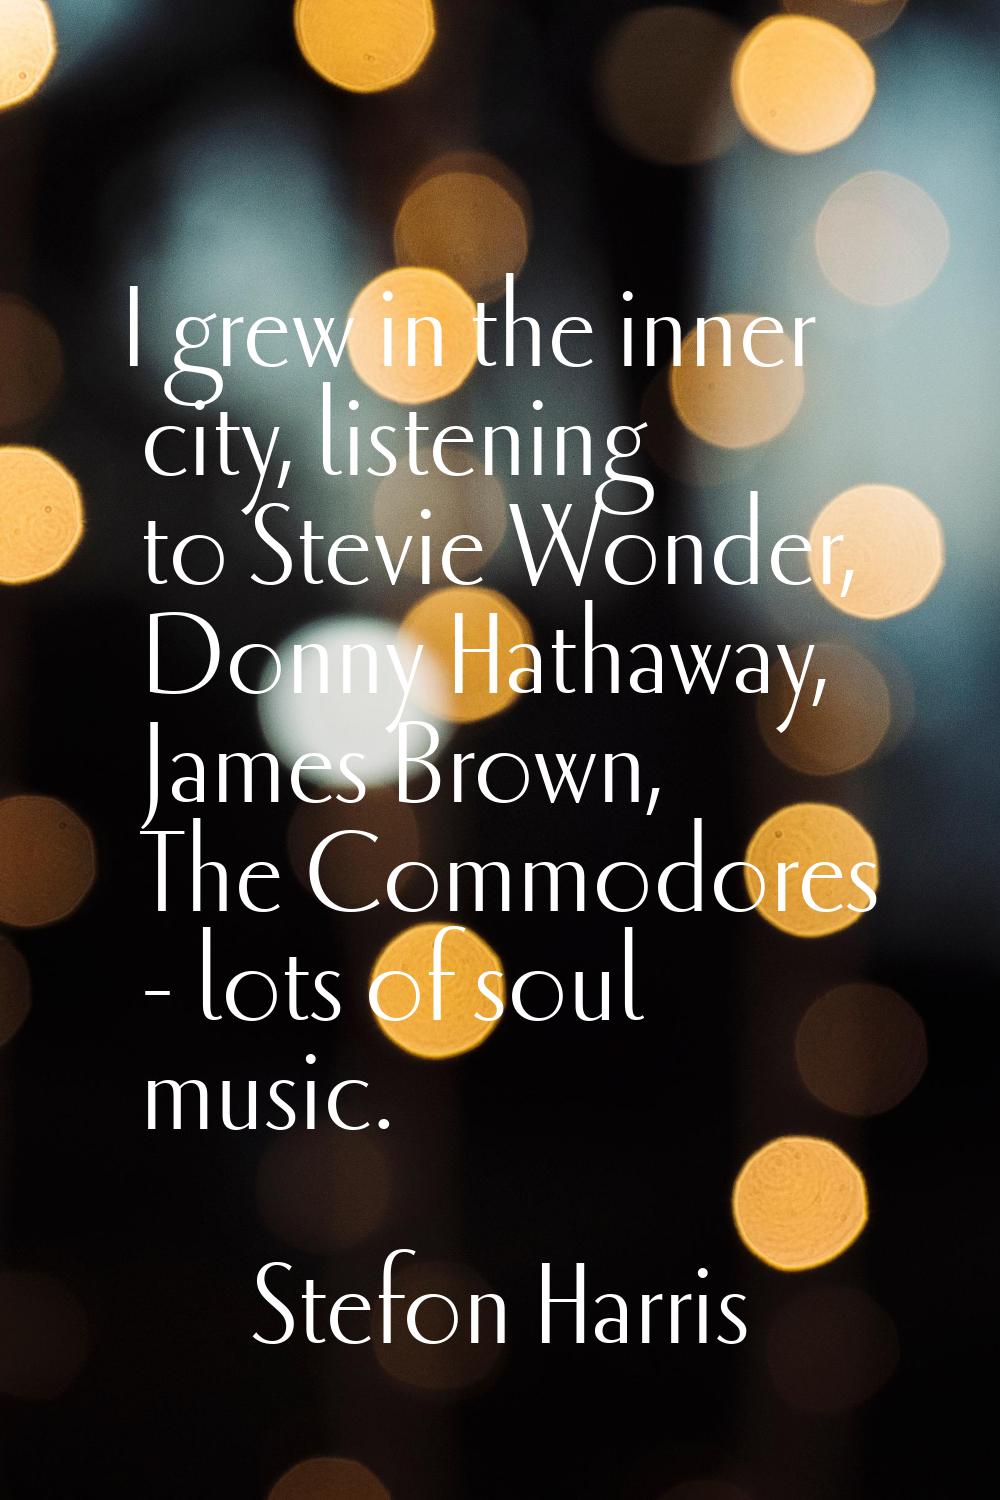 I grew in the inner city, listening to Stevie Wonder, Donny Hathaway, James Brown, The Commodores -